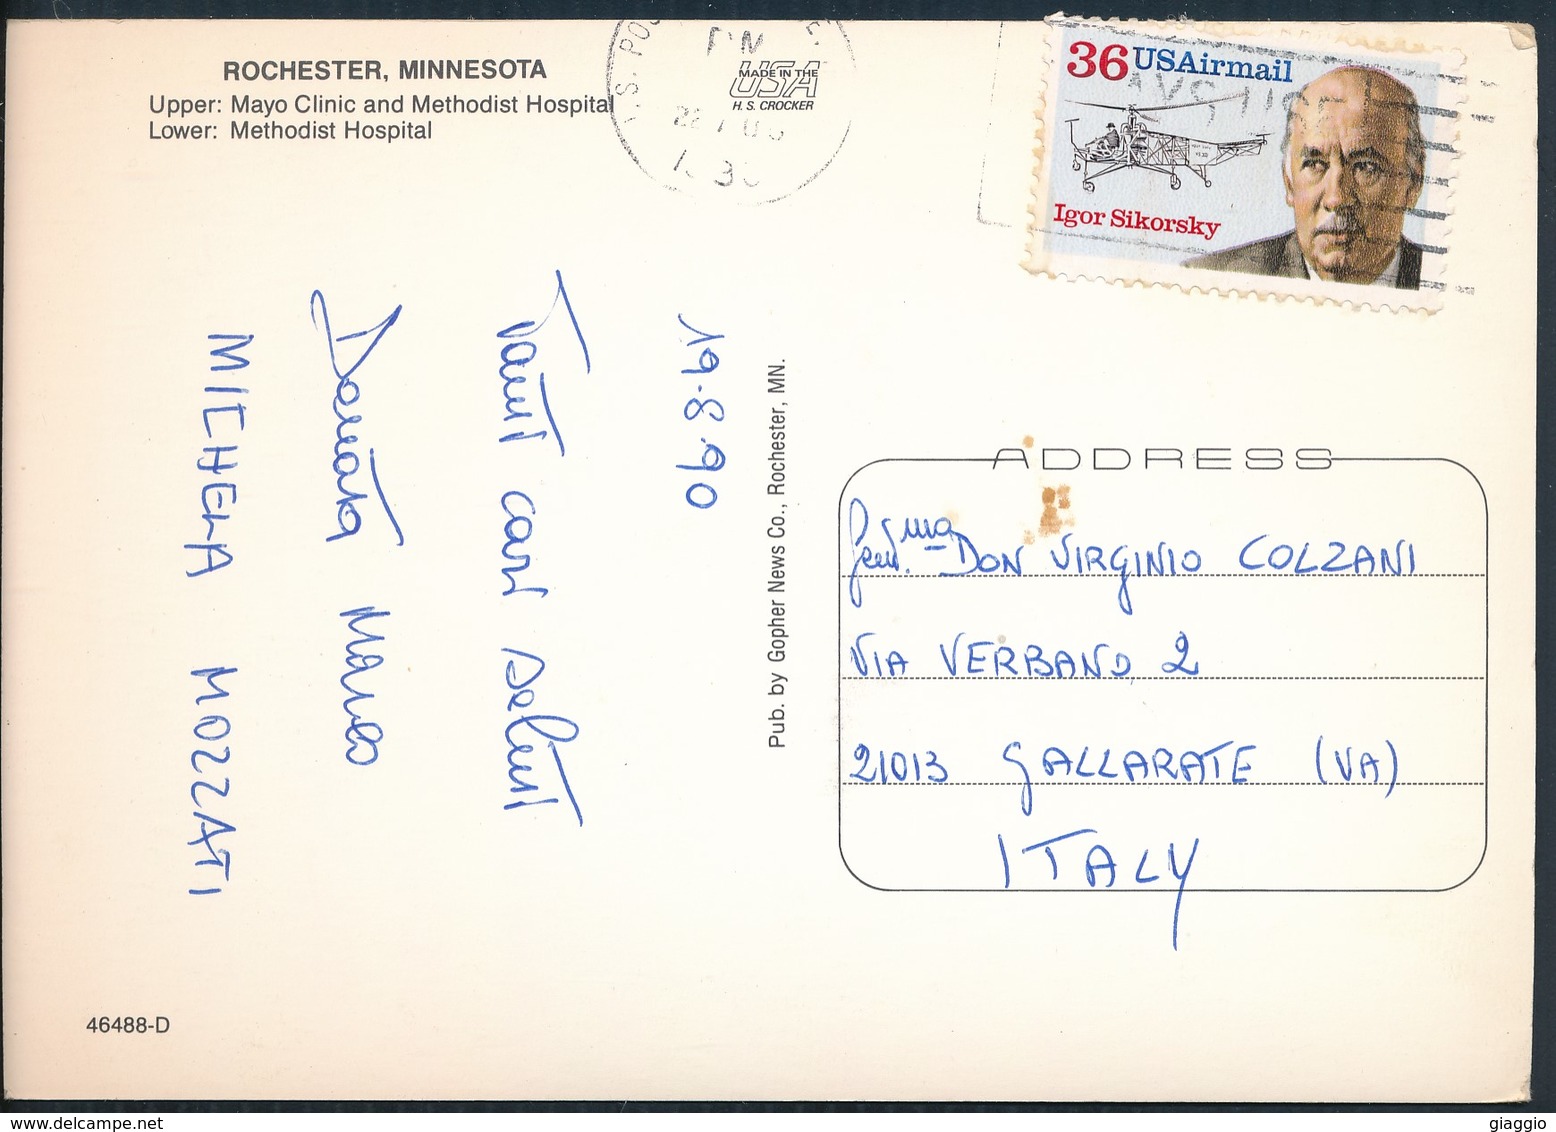 °°° 19678 - USA - MN - GREETINGS FROM ROCHESTER - 1990 With Stamps °°° - Rochester